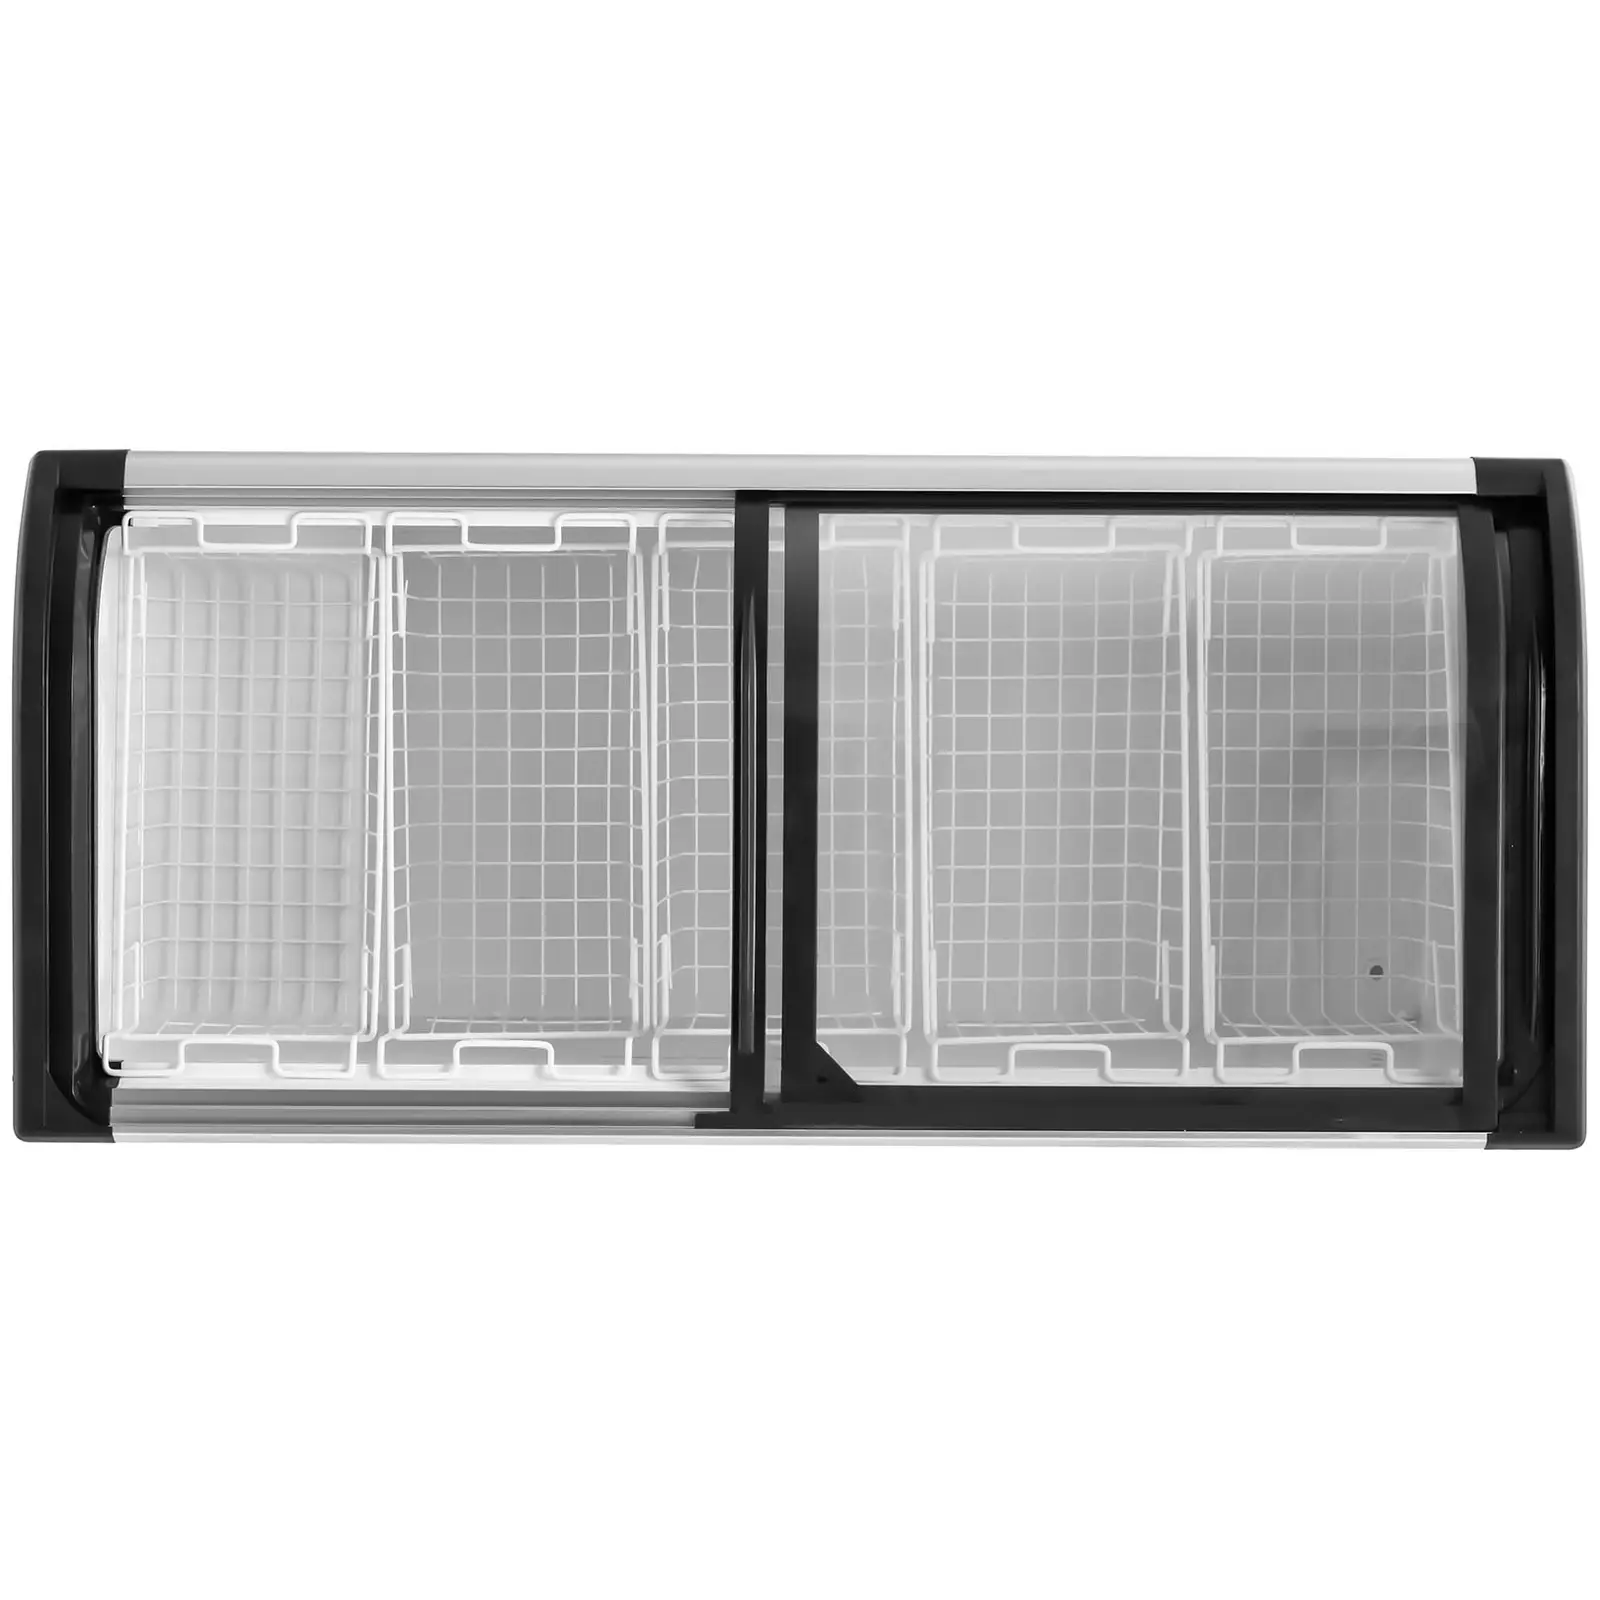 Chest Freezer - 445 L - Royal Catering - glass doors